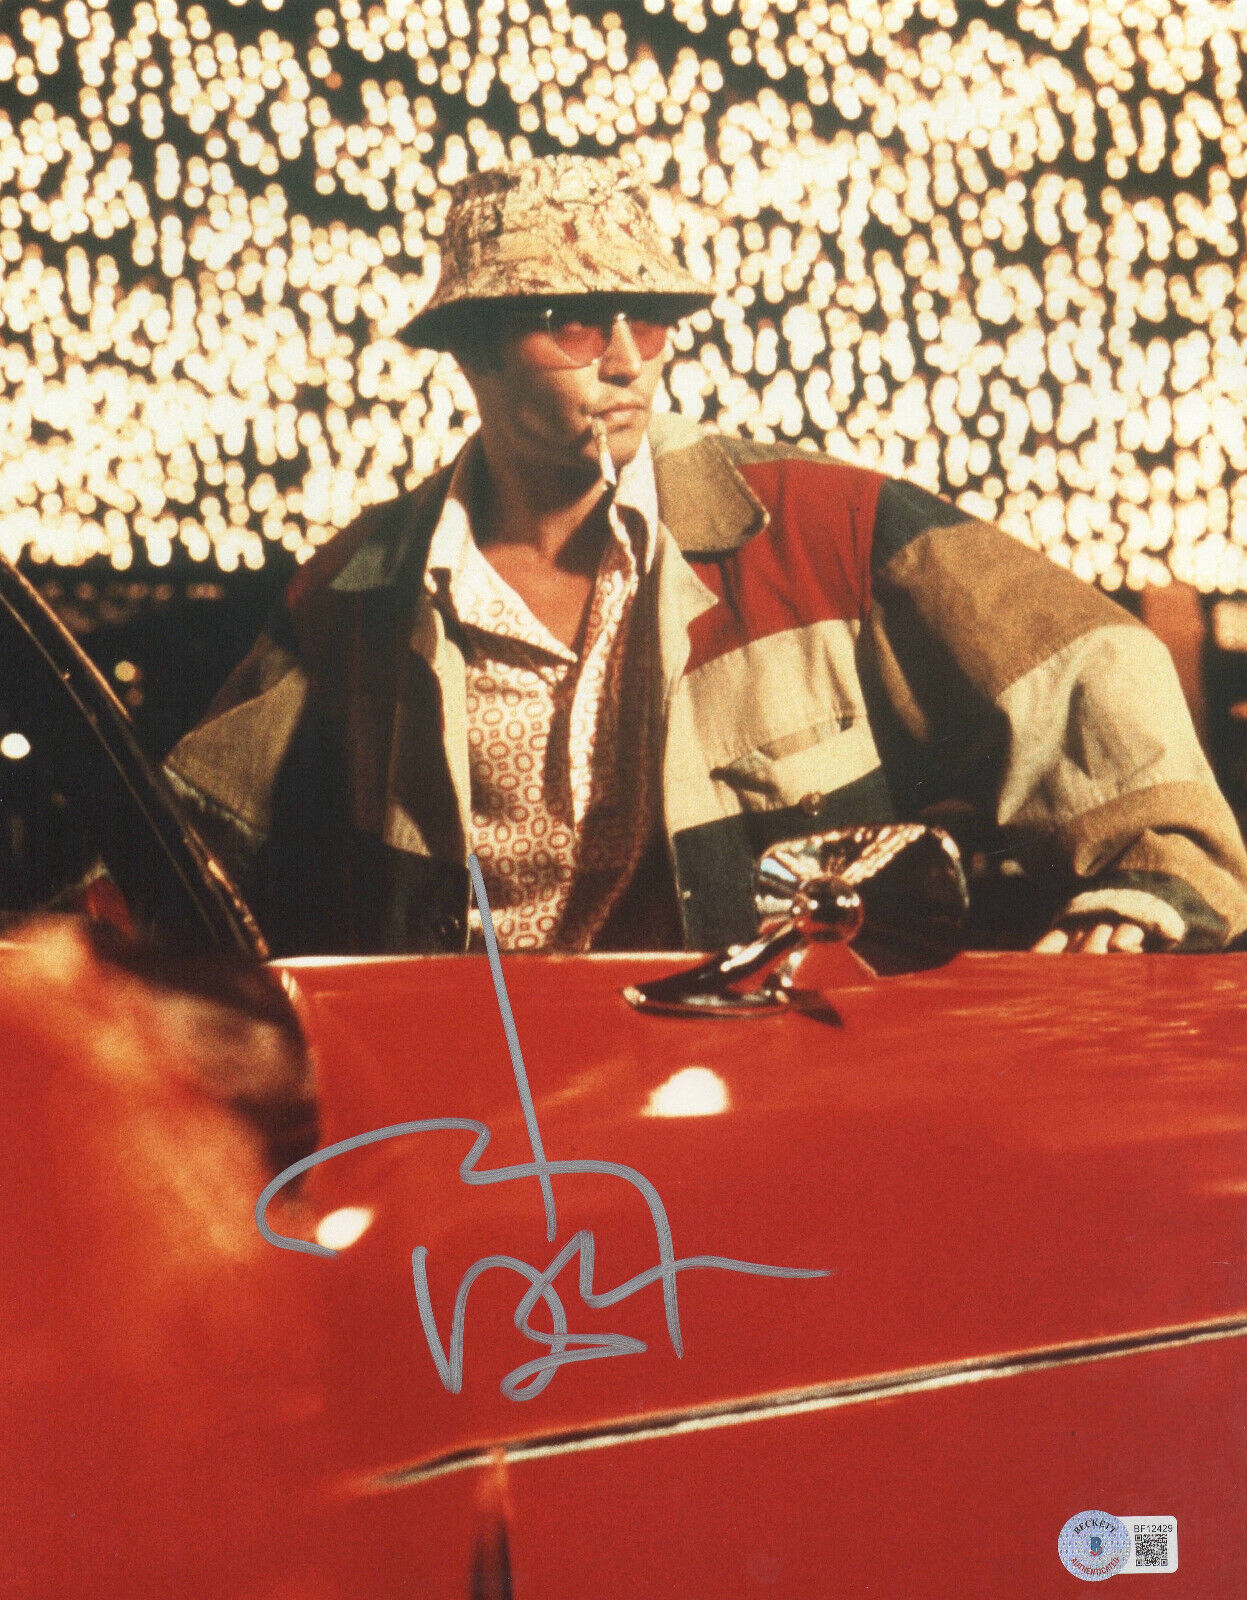 JOHNNY DEPP SIGNED FEAR AND LOATHING IN LAS VEGAS 11X14 PHOTO AUTOGRAPH BECKETT